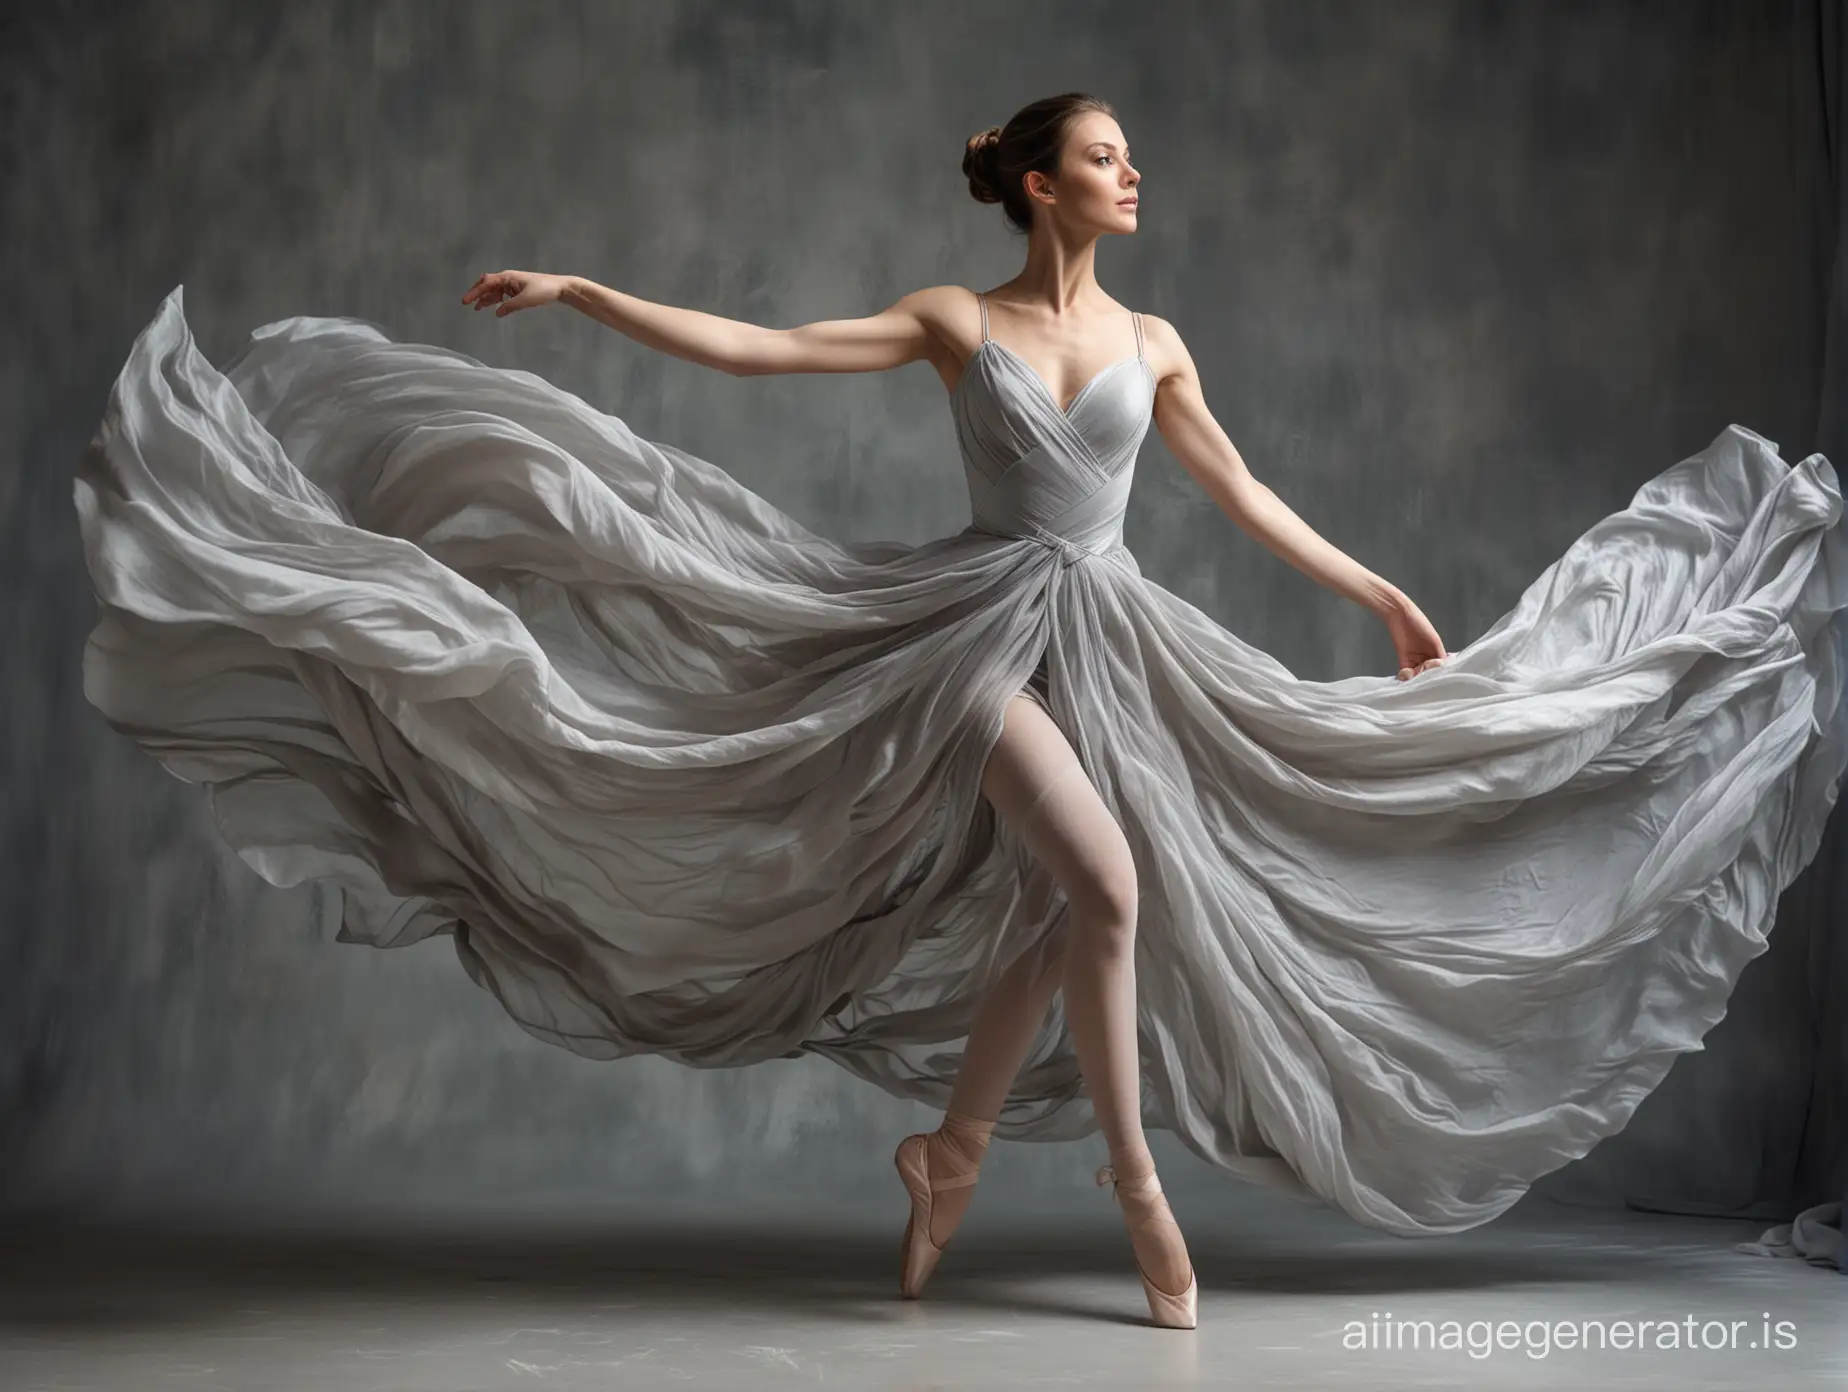 A young beautiful ballerina in a grand jete ballet jump, full length, wearing a long dress, muse of art, surrounded by a large amount of flowing silk fabric of a delicate gray color, the fabric surrounds her from all sides, complex folds, dynamic pose, primary energy, high resolution, fashionable photoshoot, Laocoön, complex lighting